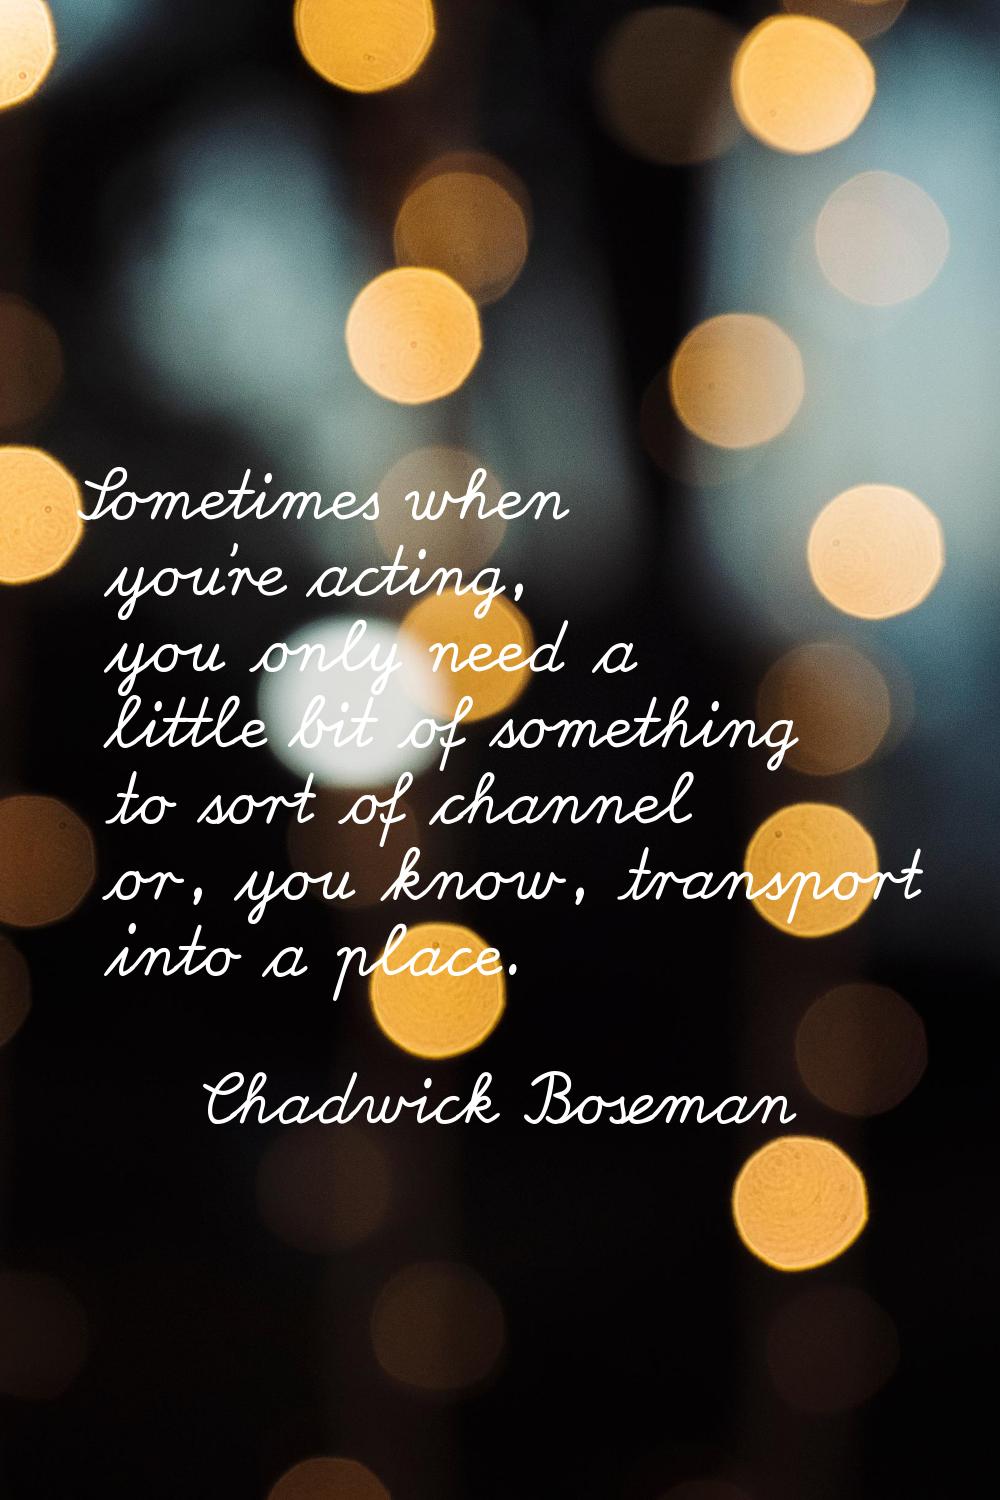 Sometimes when you're acting, you only need a little bit of something to sort of channel or, you kn